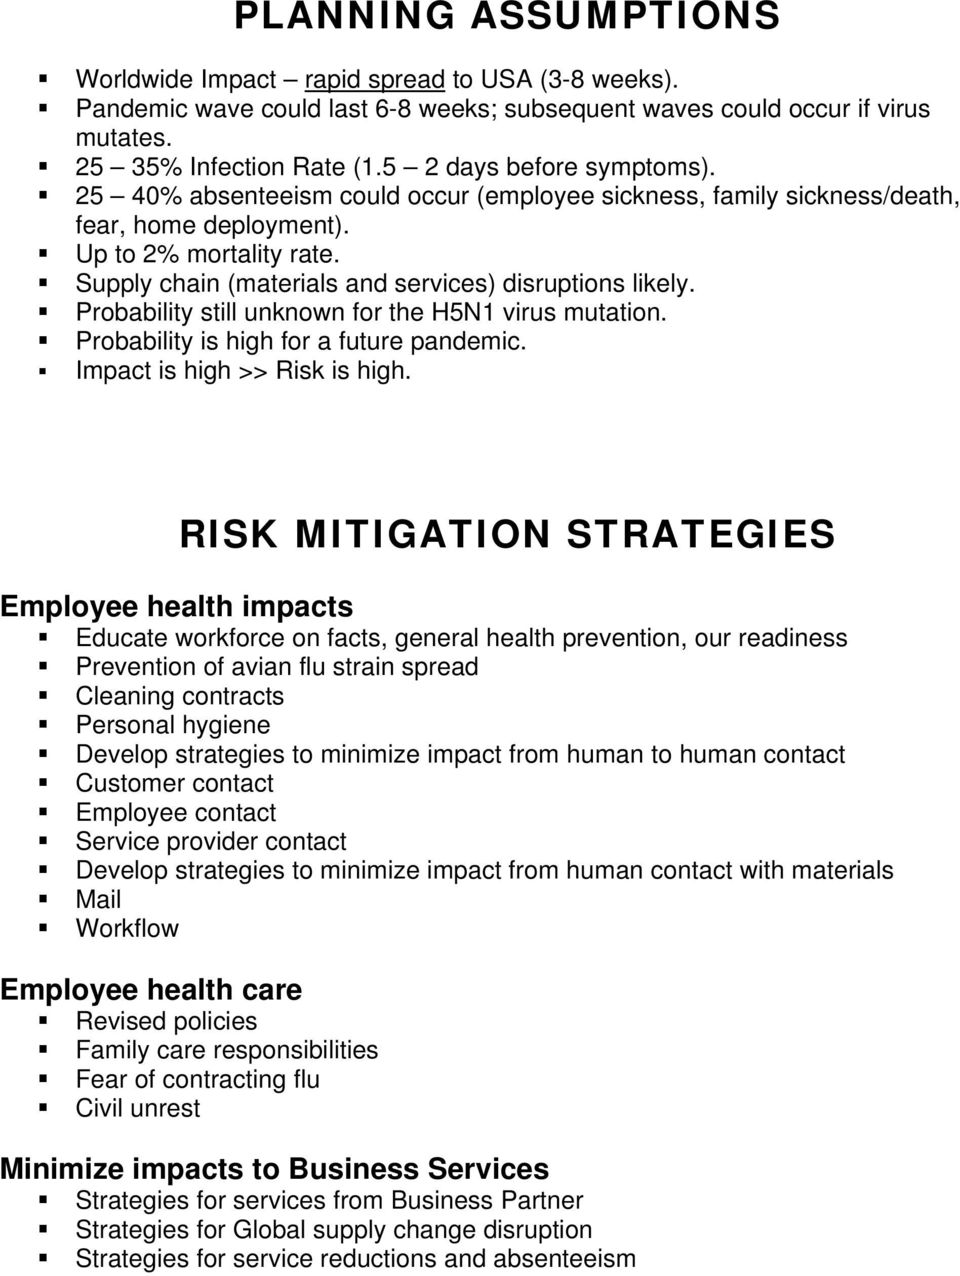 Supply chain (materials and services) disruptions likely. Probability still unknown for the H5N1 virus mutation. Probability is high for a future pandemic. Impact is high >> Risk is high.